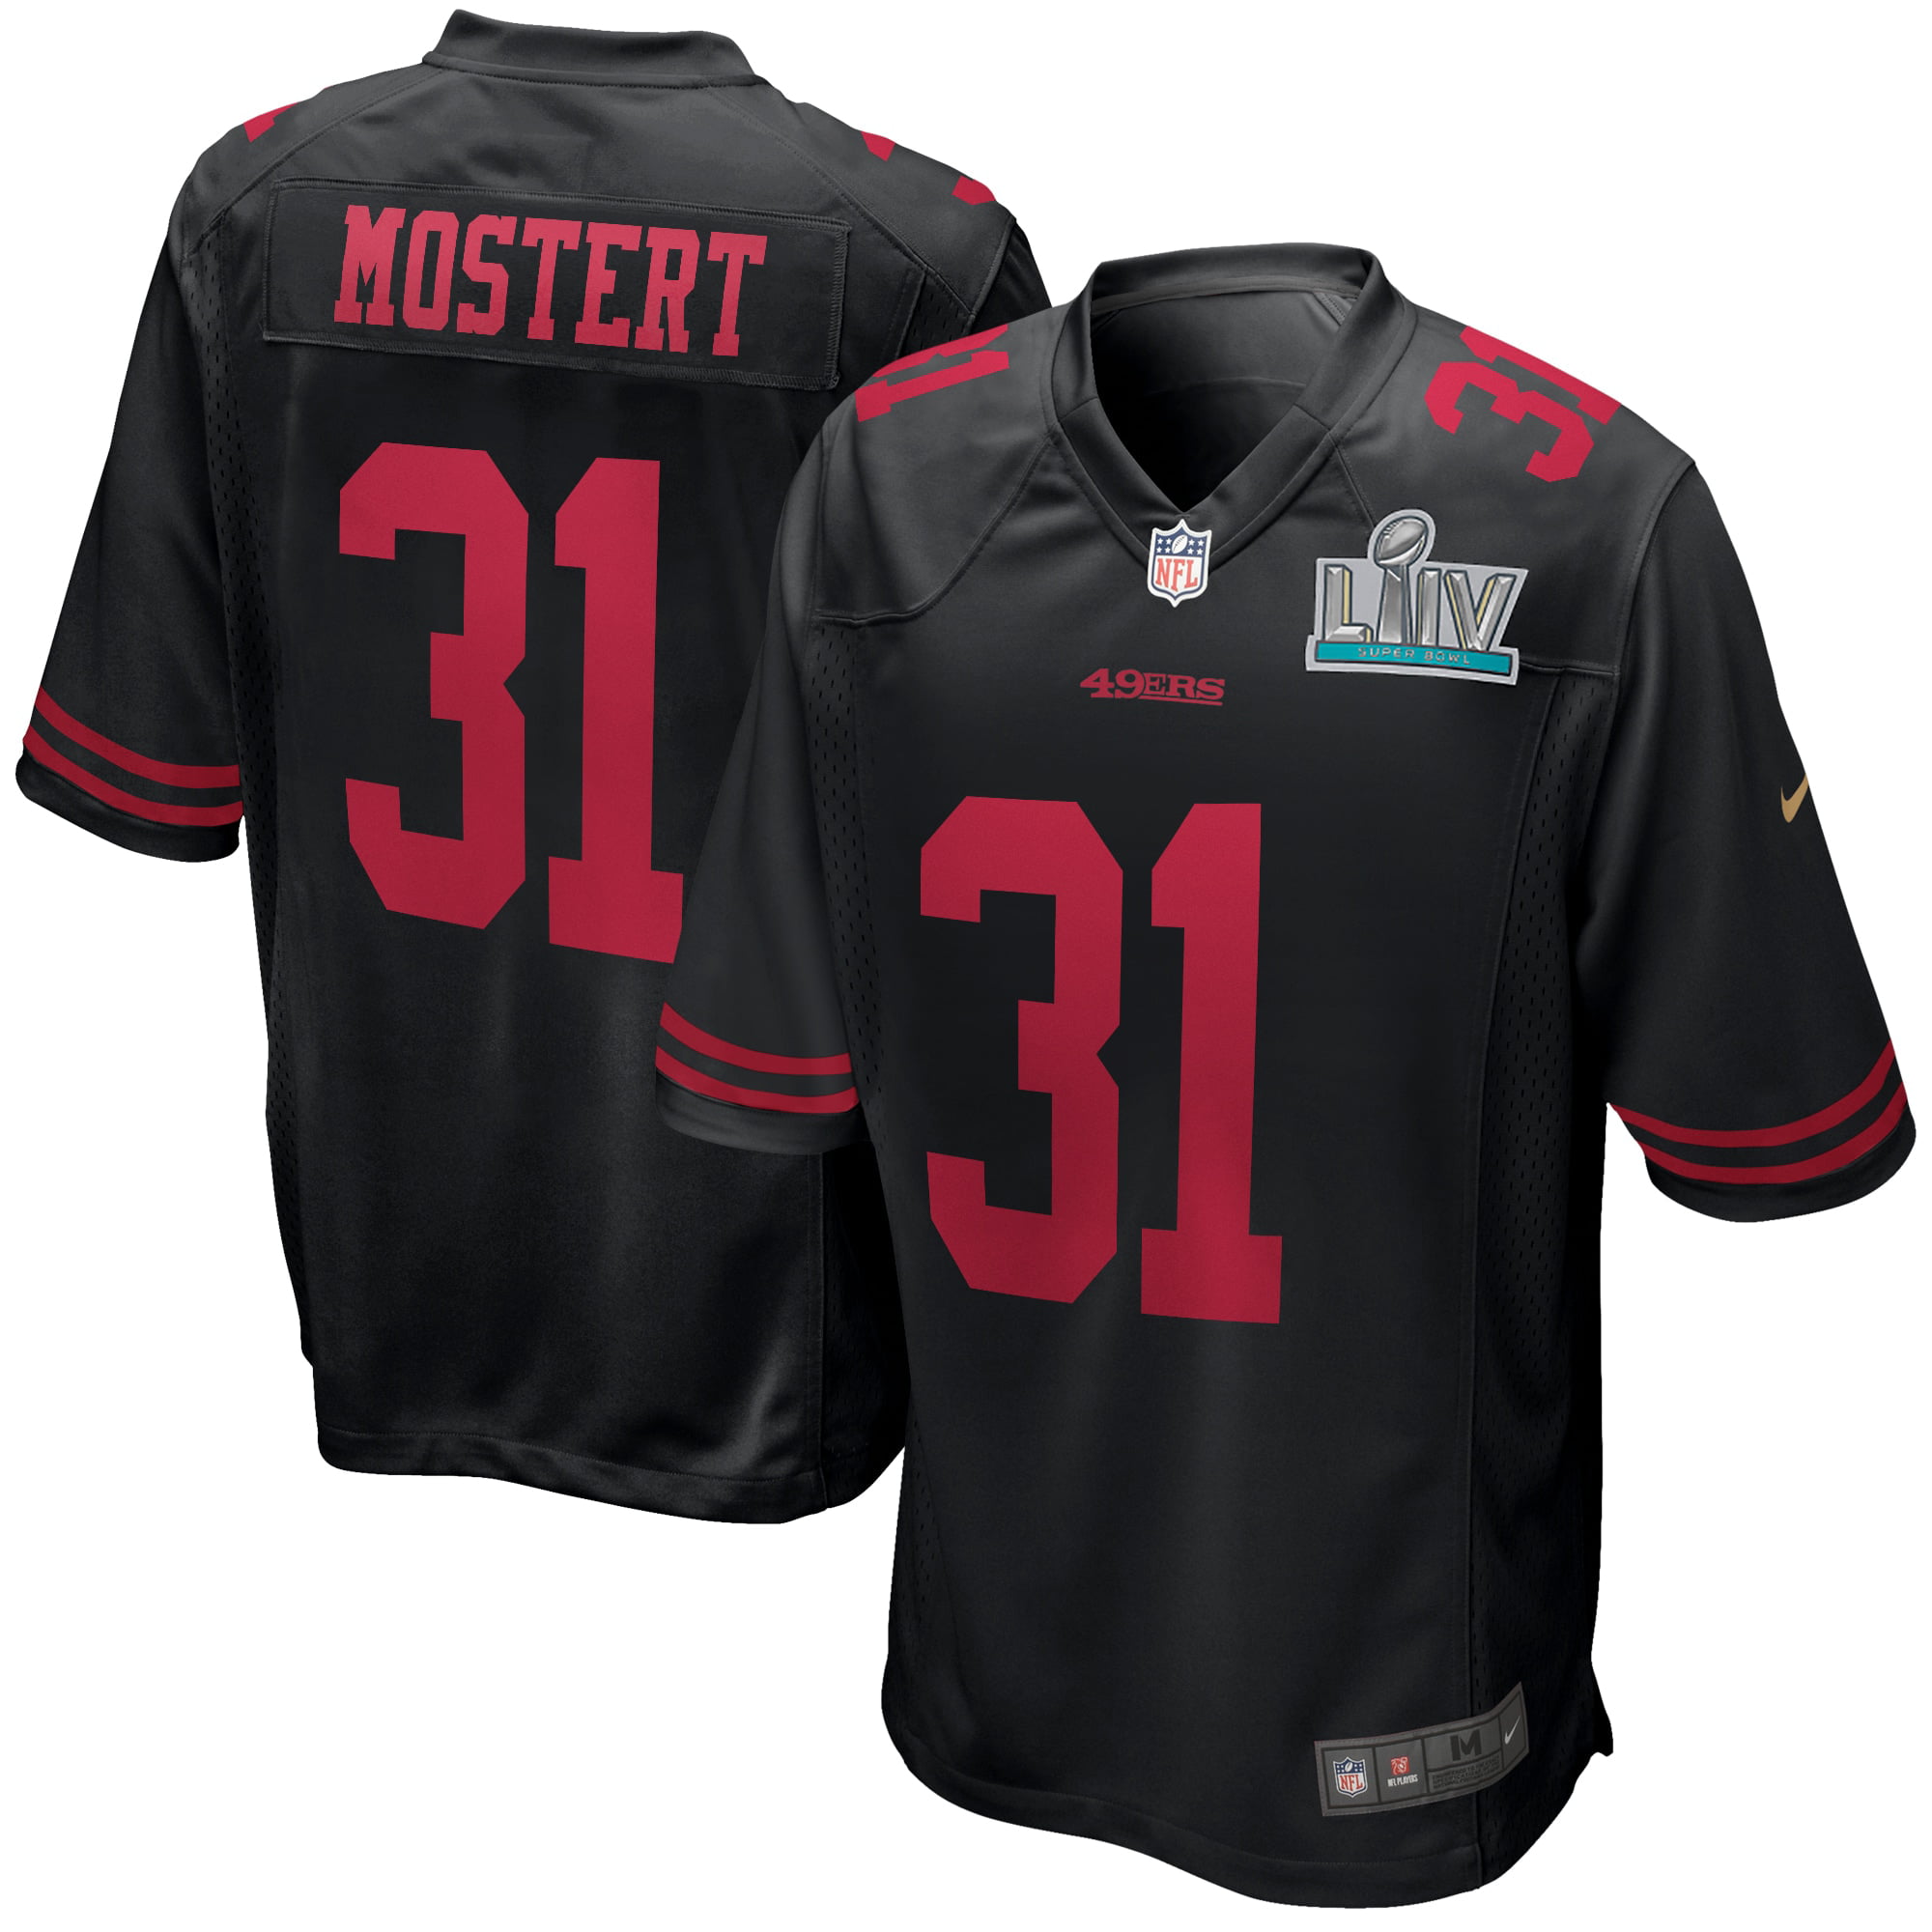 49ers jersey 31